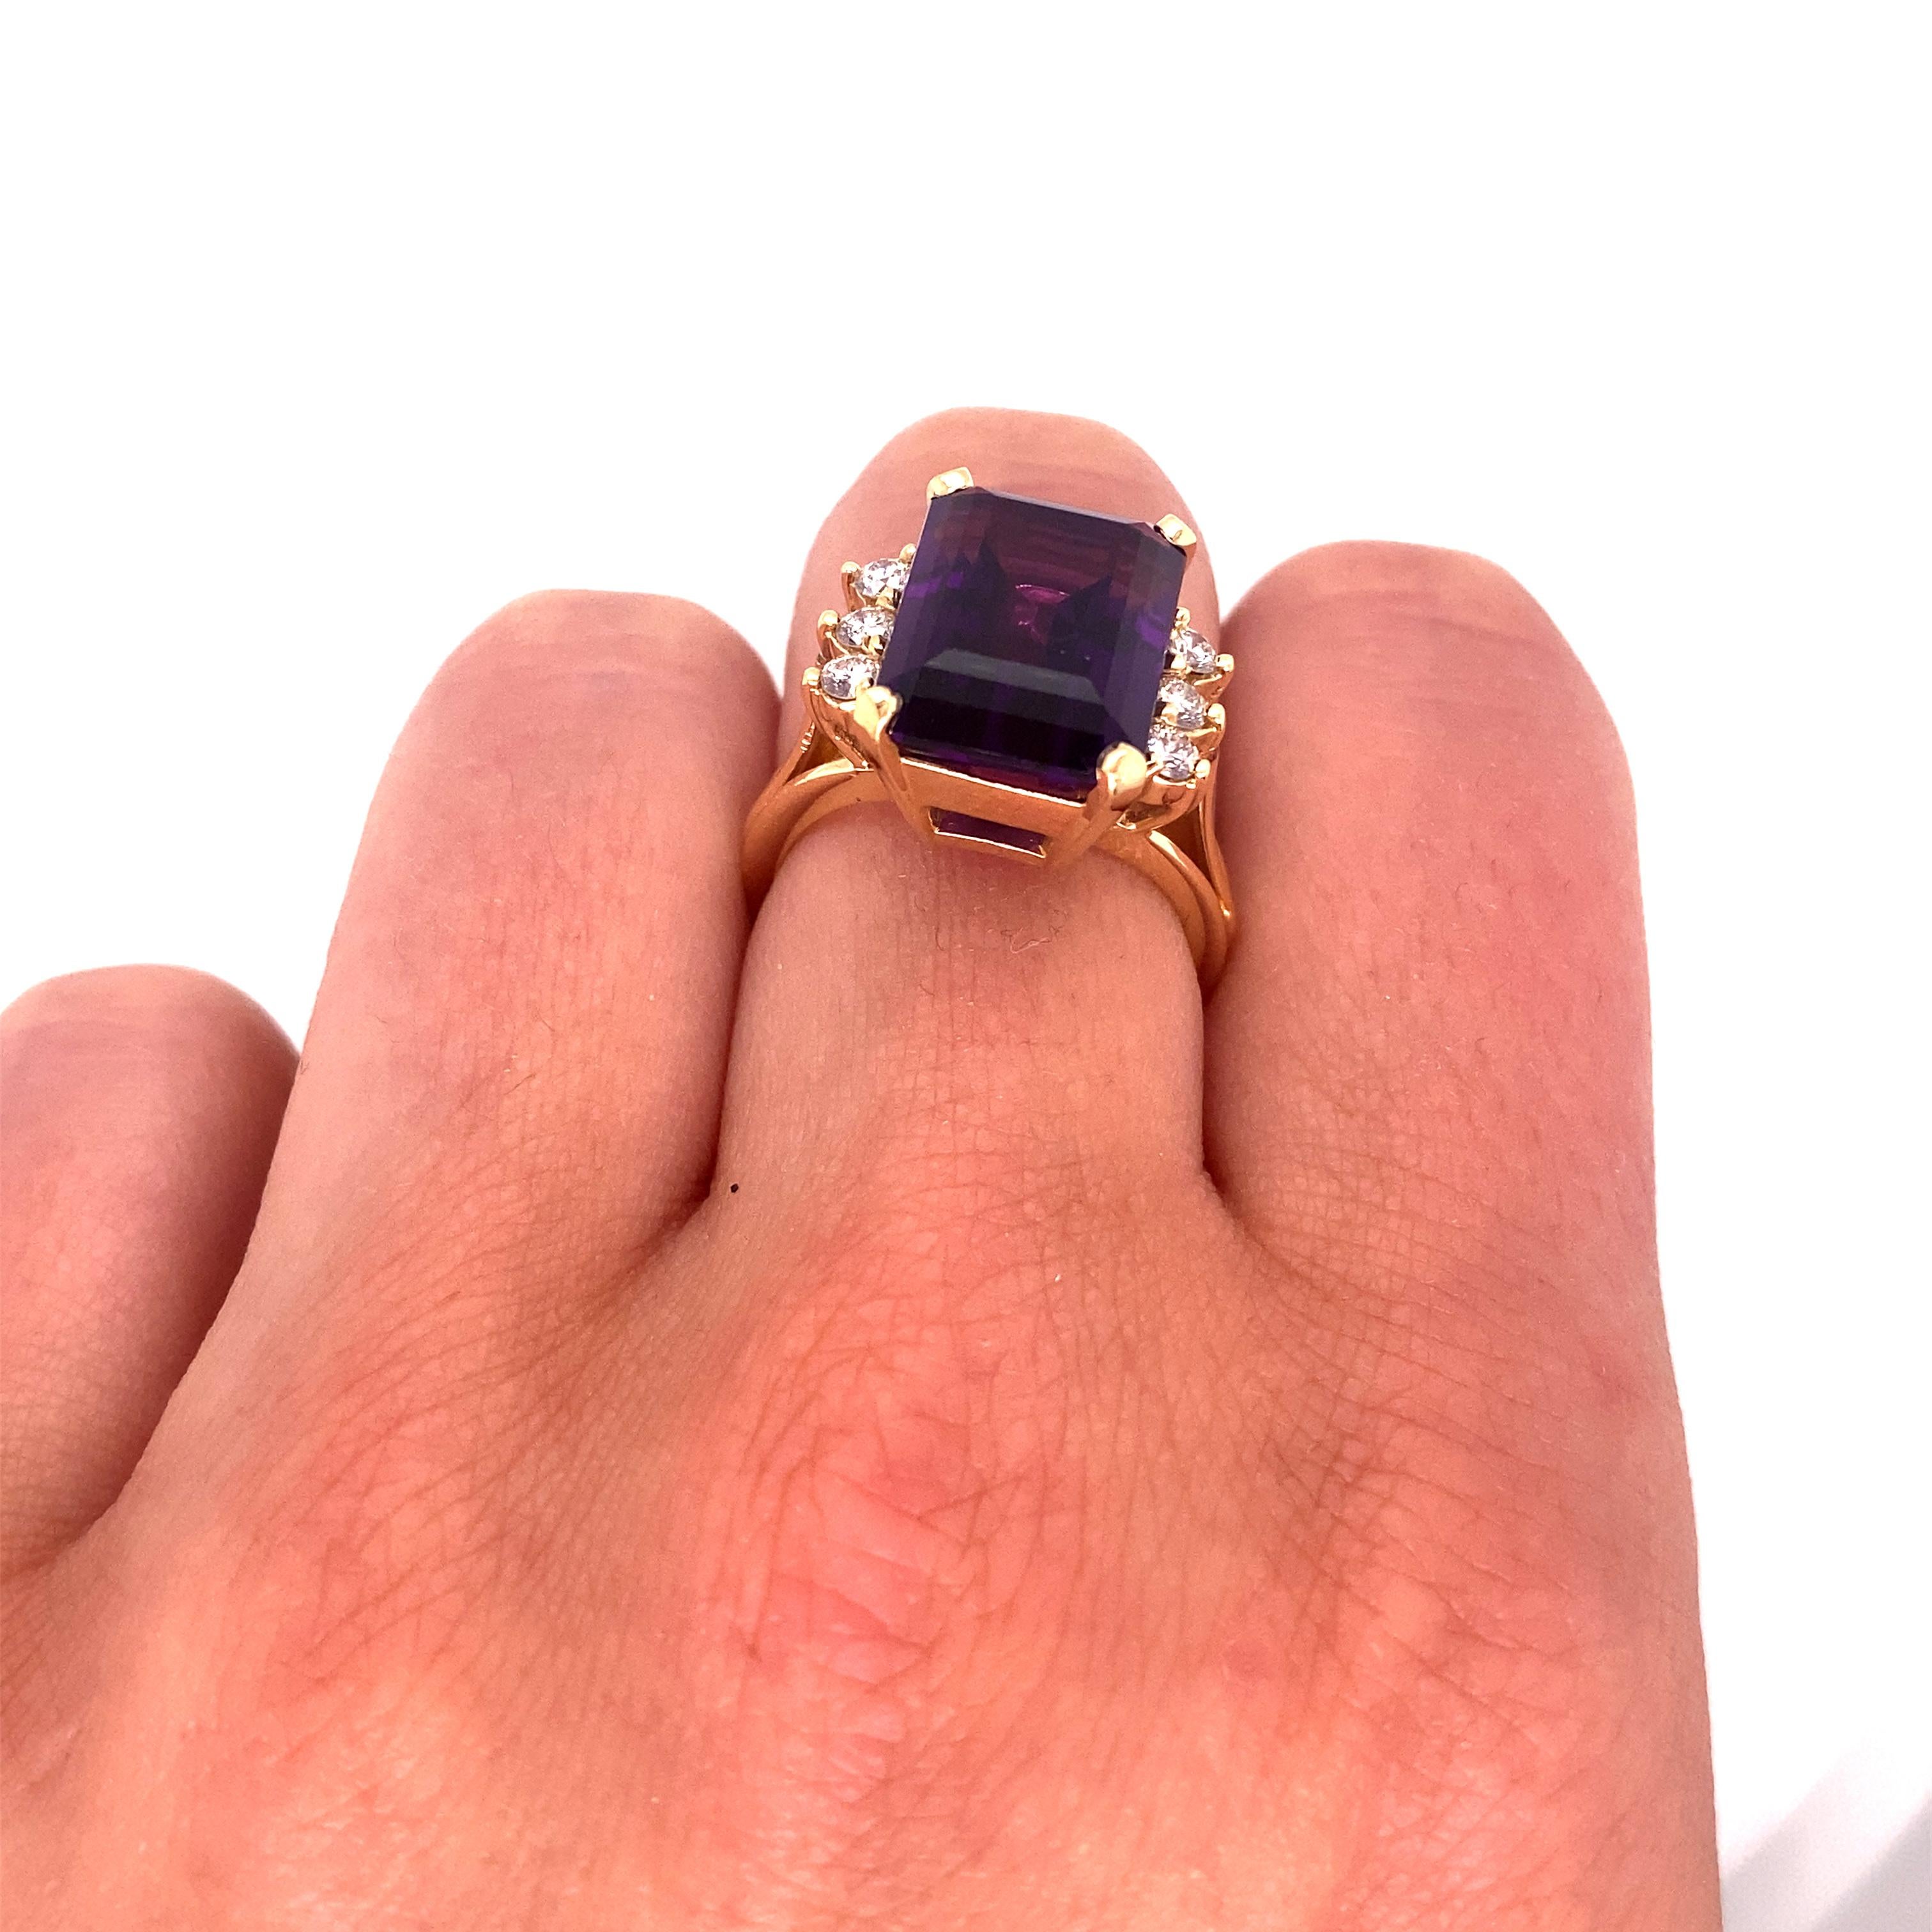 Vintage 1980's 7.35ct Emerald Cut Amethyst Ring with Diamonds 3